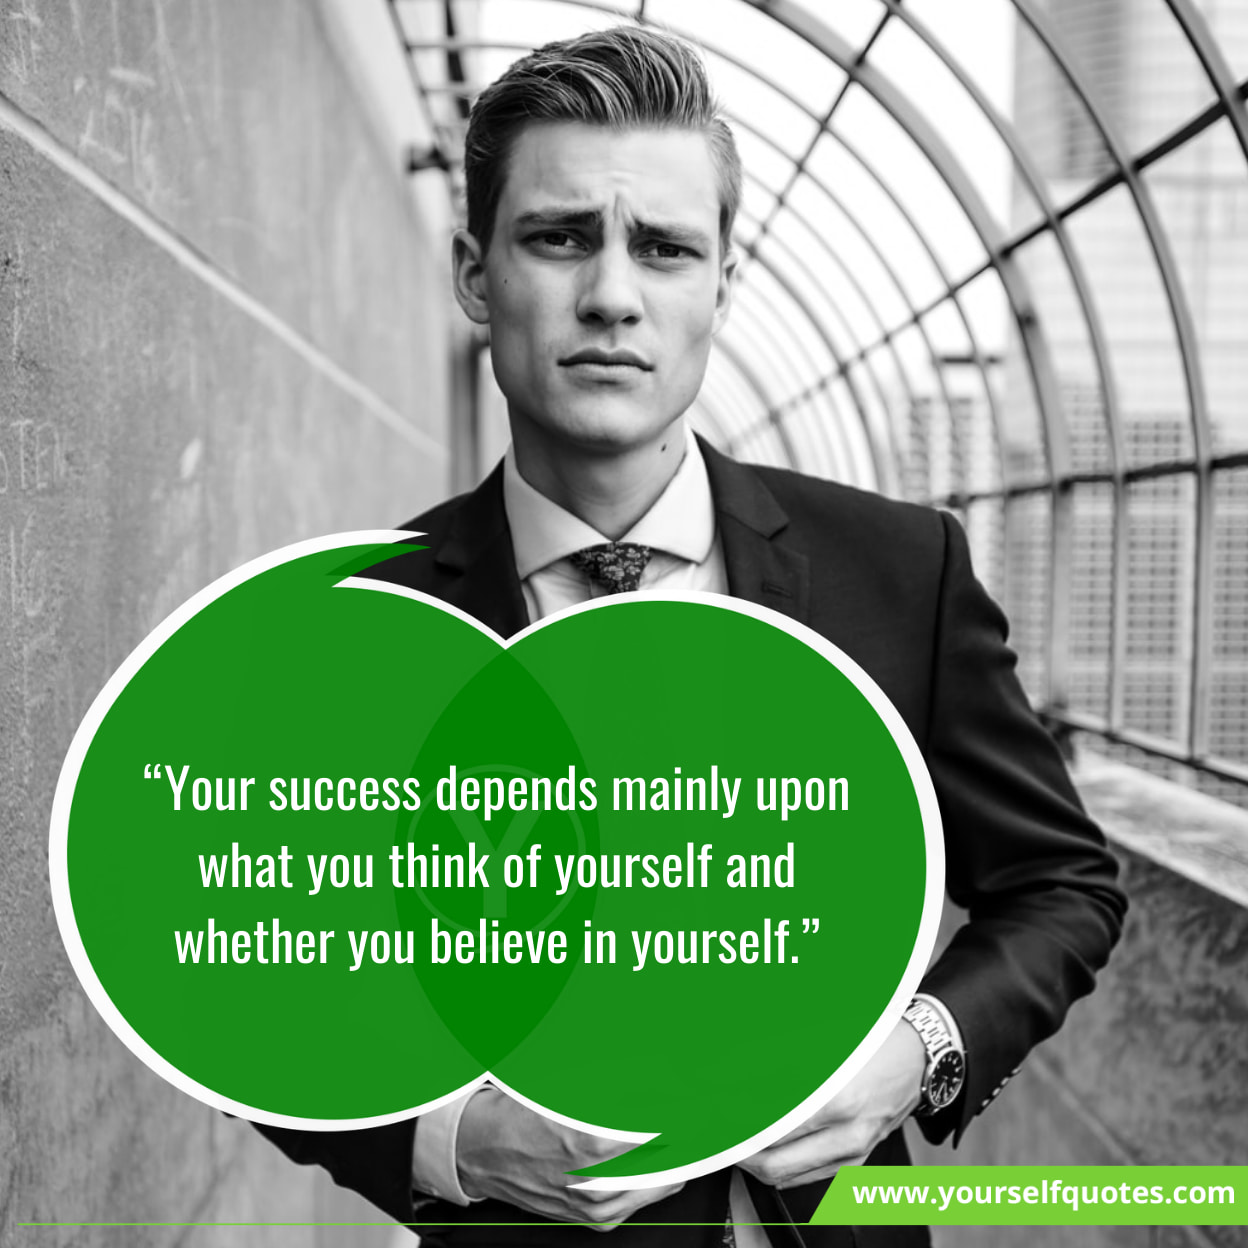 Motivational Quotes On Believe in Yourself